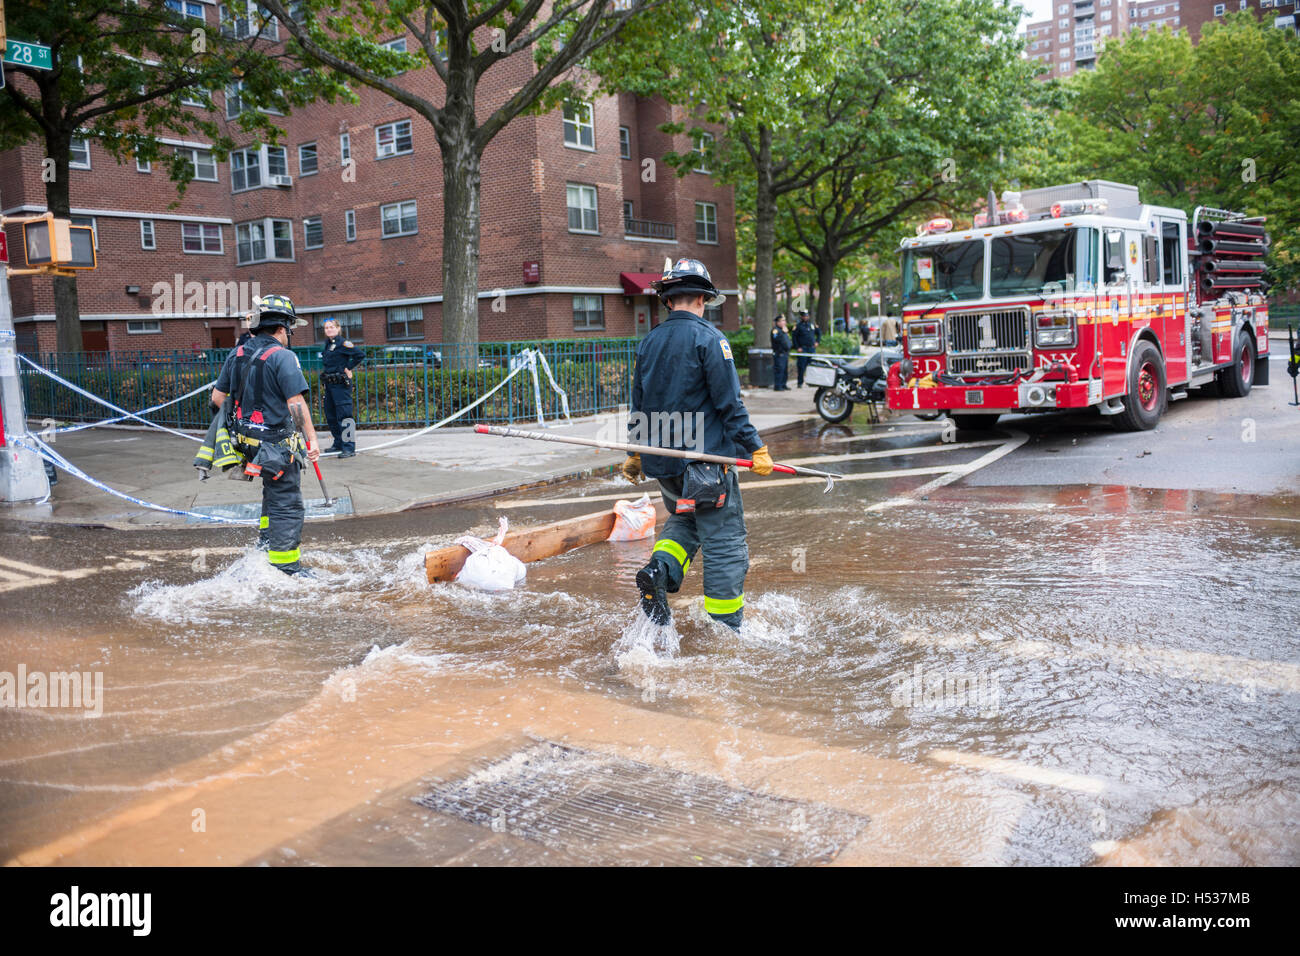 FDNY firefighters respond to a watermain break  in the Chelsea neighborhood of New York on Wednesday, October 12, 2016. The watermain break caused water to gush but it was mostly contained to the street safely running into storm drains. (© Richard B. Levine) Stock Photo